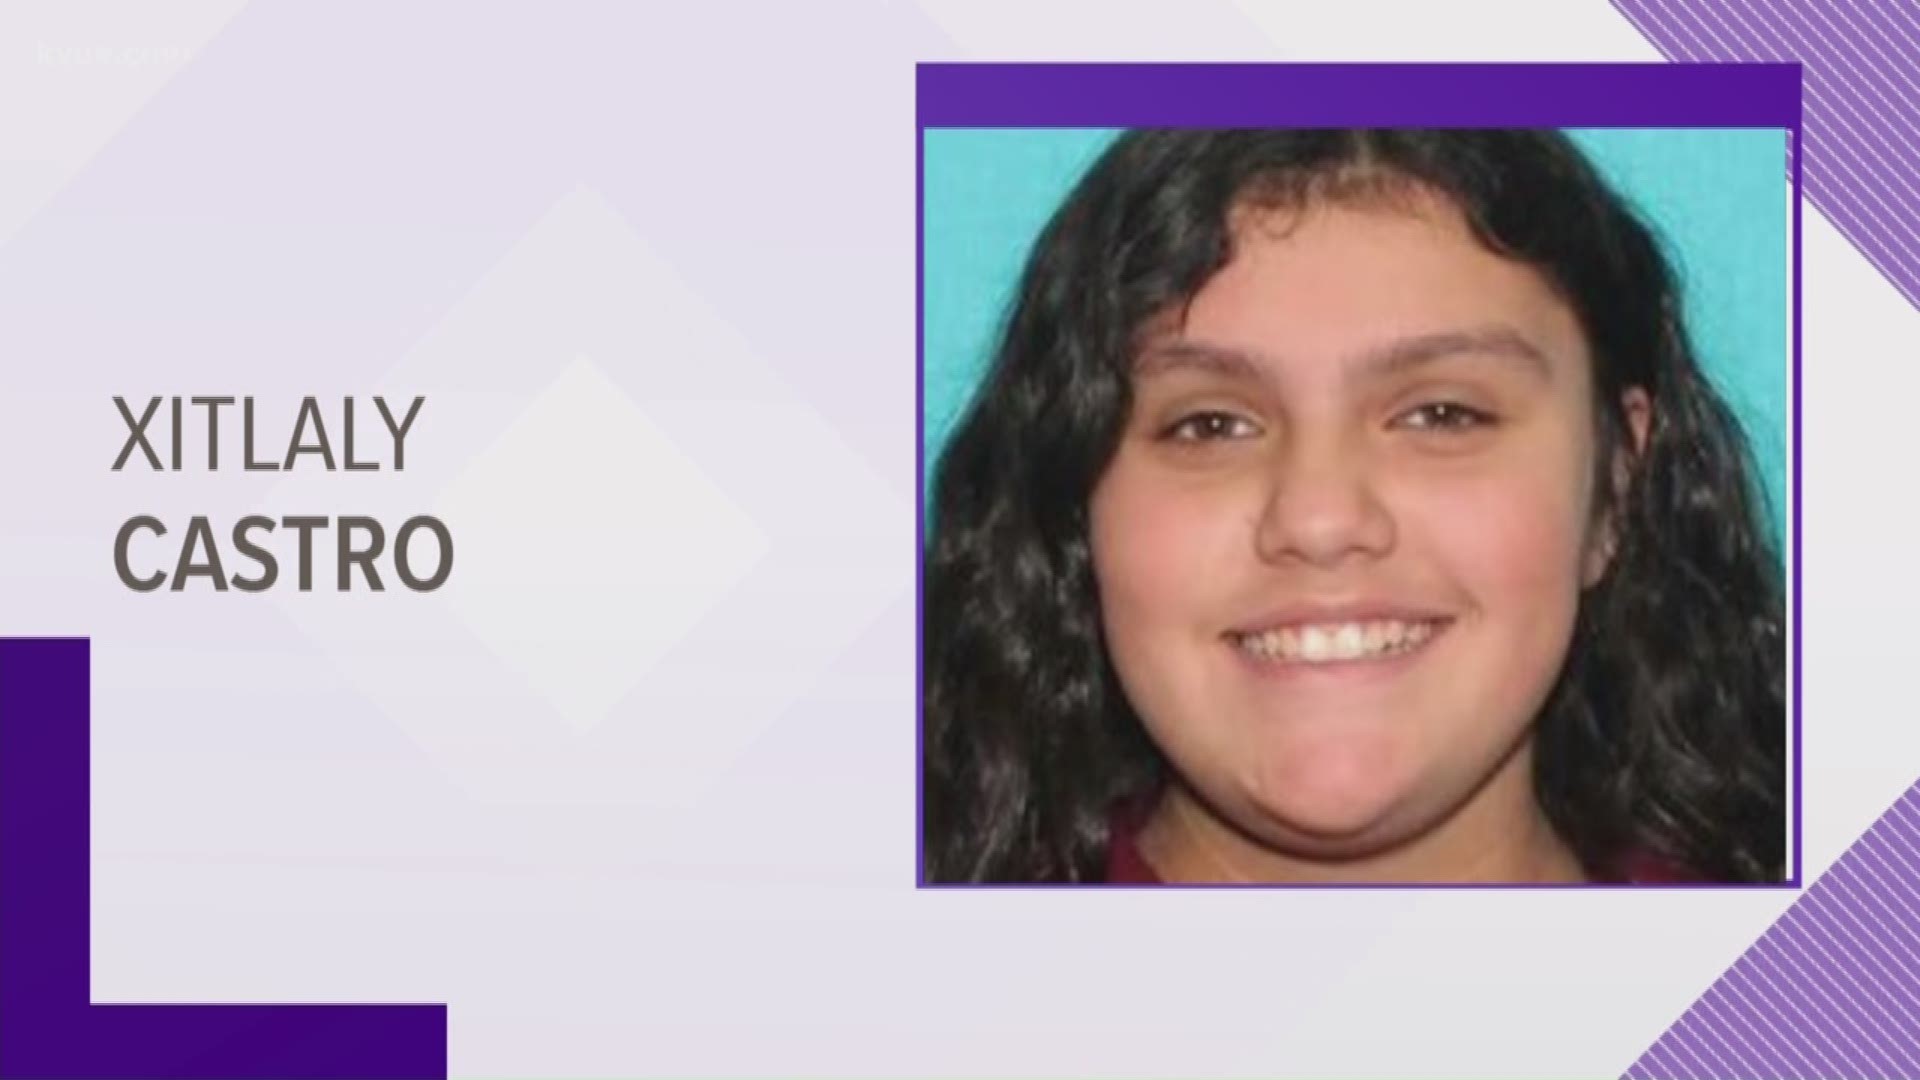 Xitlaly "Kaly" Castro was dropped off at Bastrop High School Friday at 8 a.m., but didn't go to her classes. Her whereabouts are unknown.